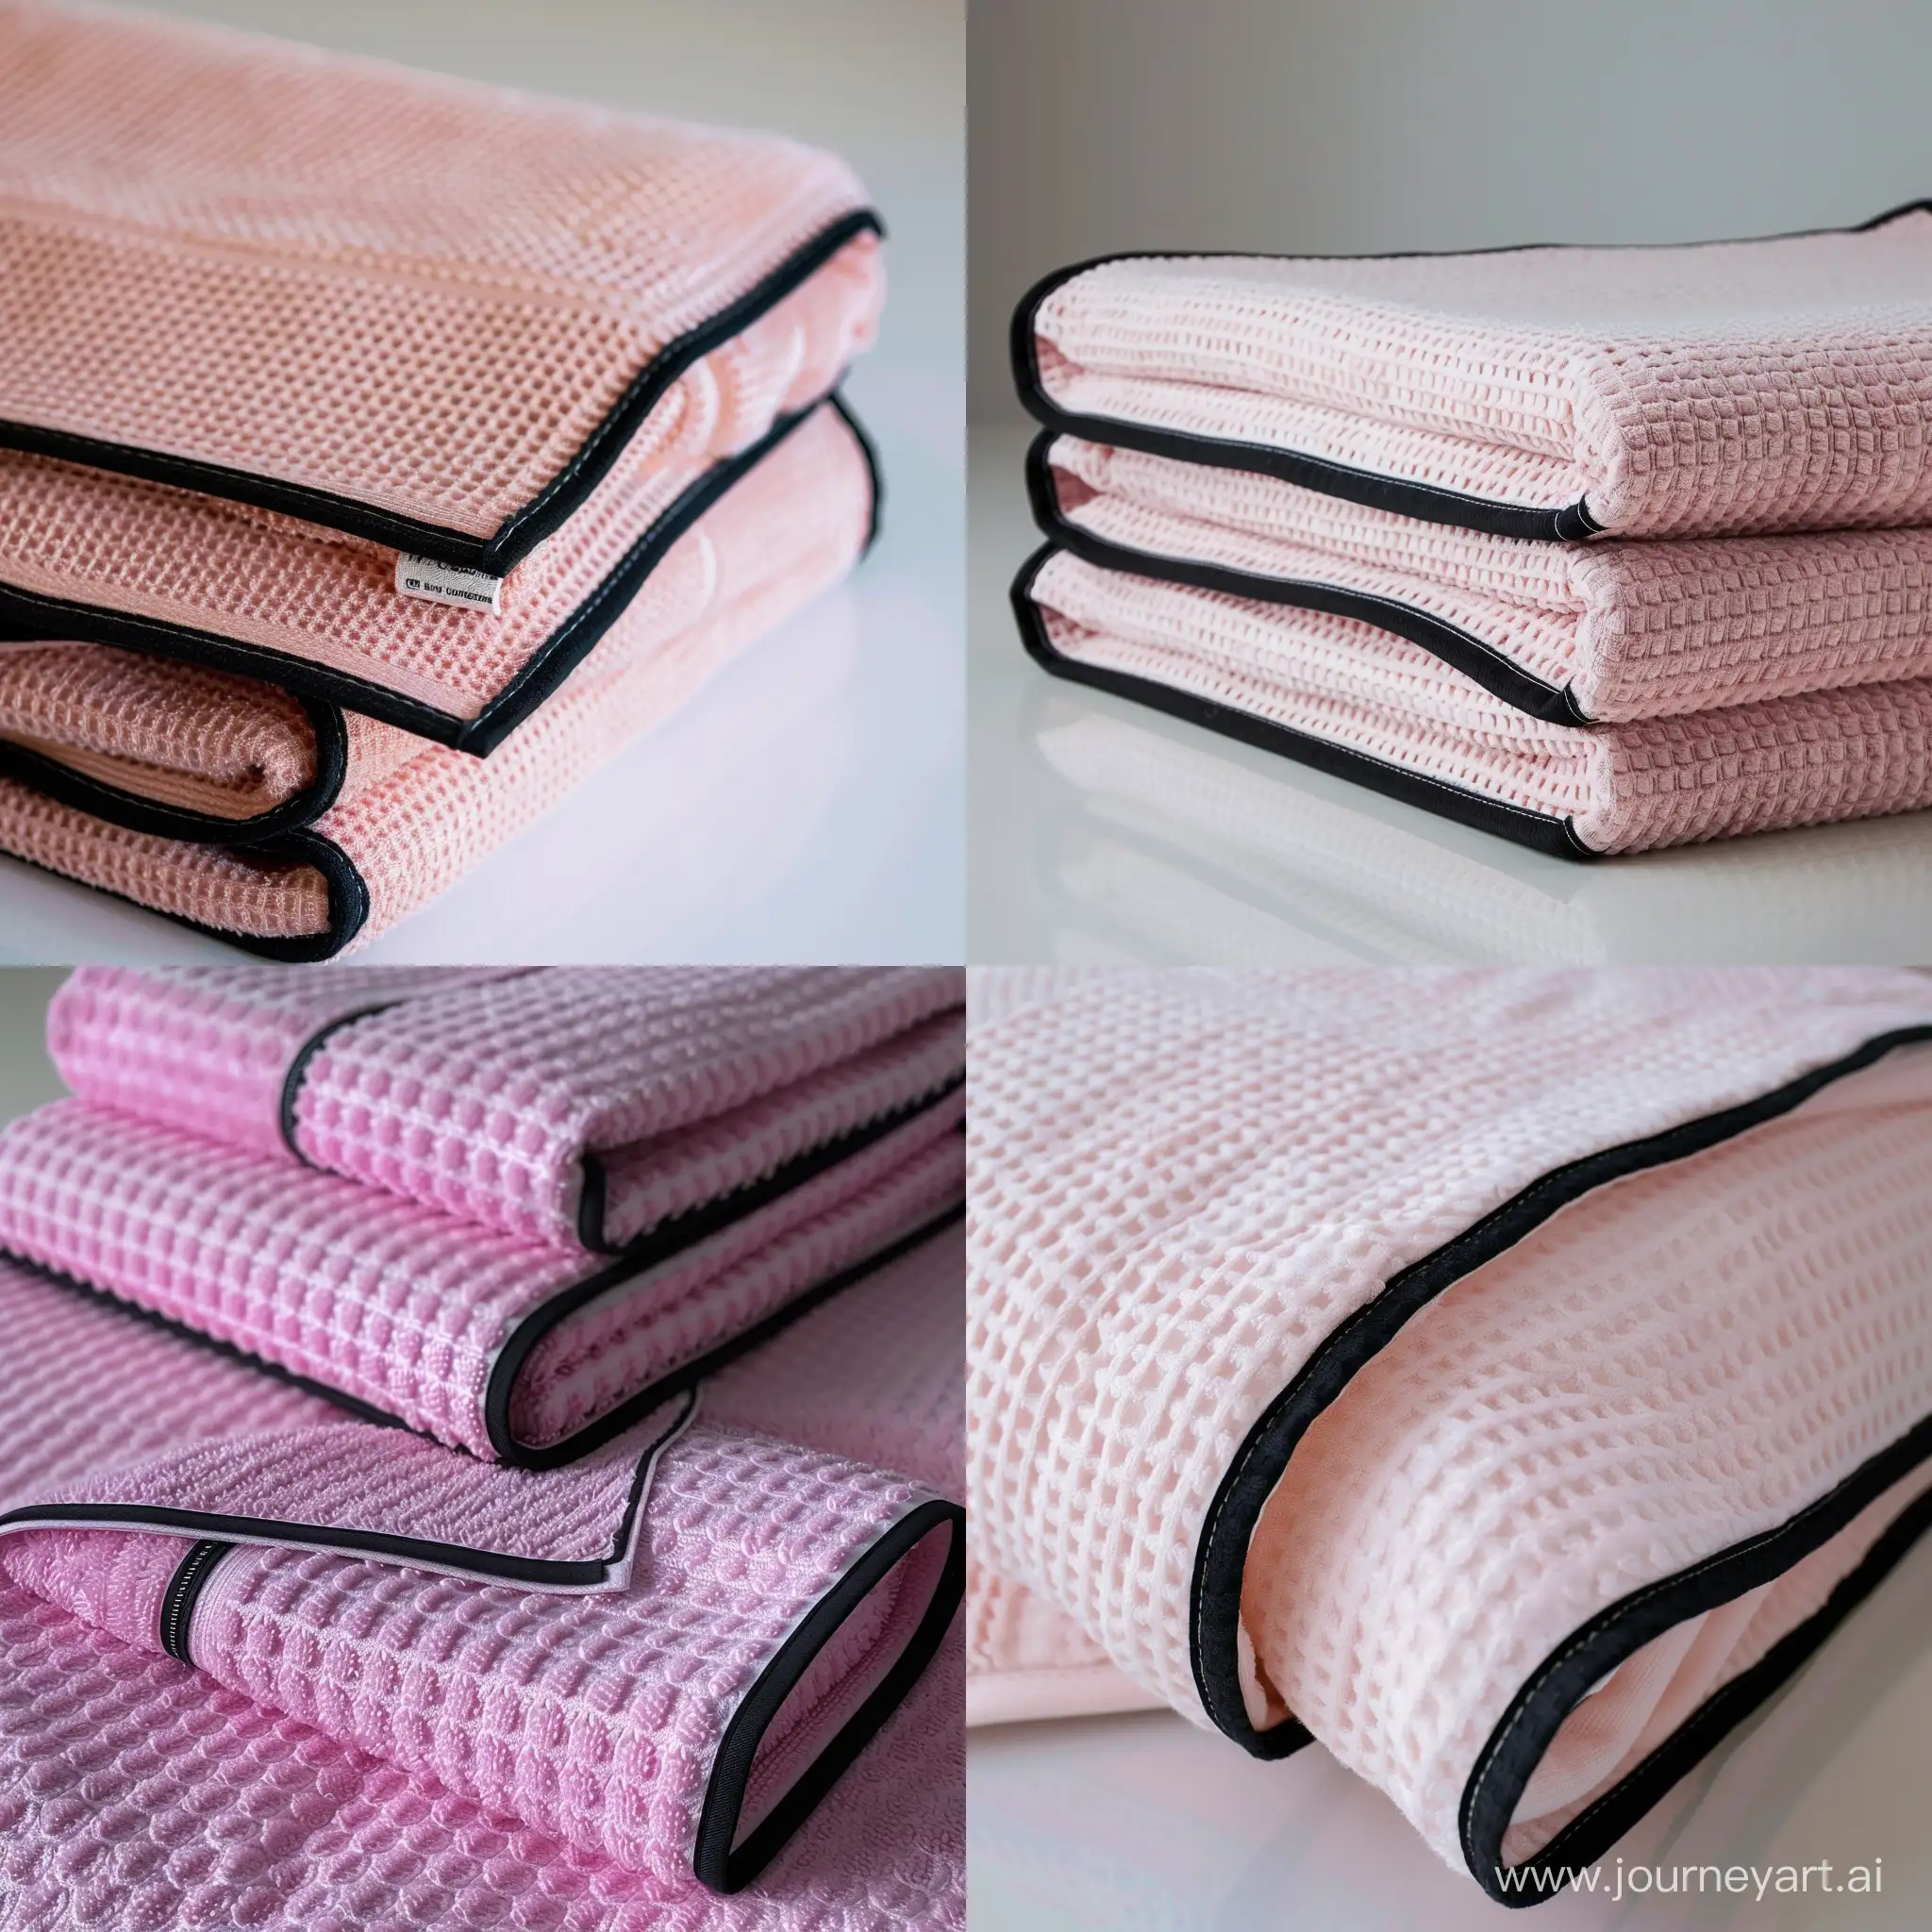 Luxurious-Pink-and-Black-Edged-Towels-Adorning-a-Designer-Apartment